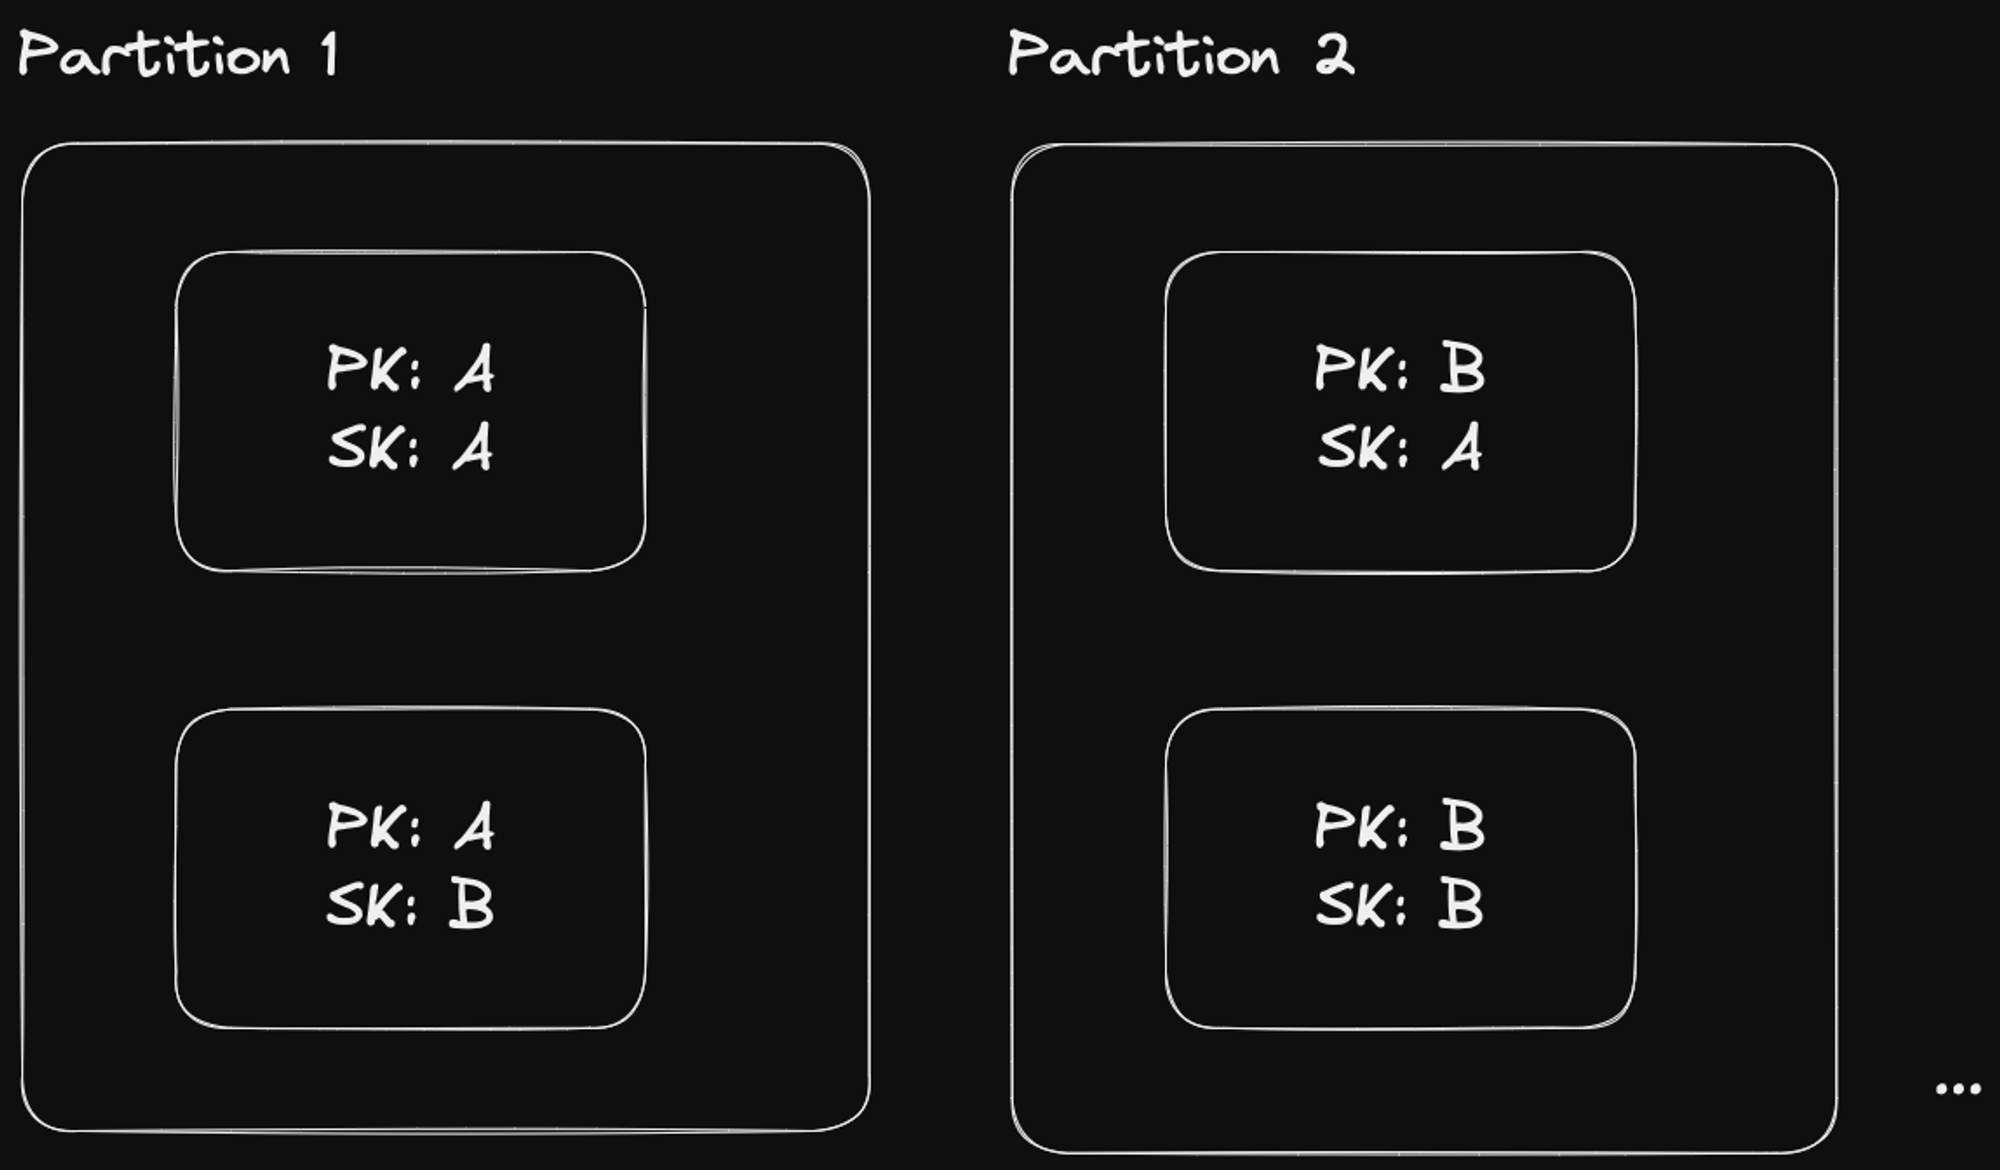 Partition key and sorting key partition mapping diagram